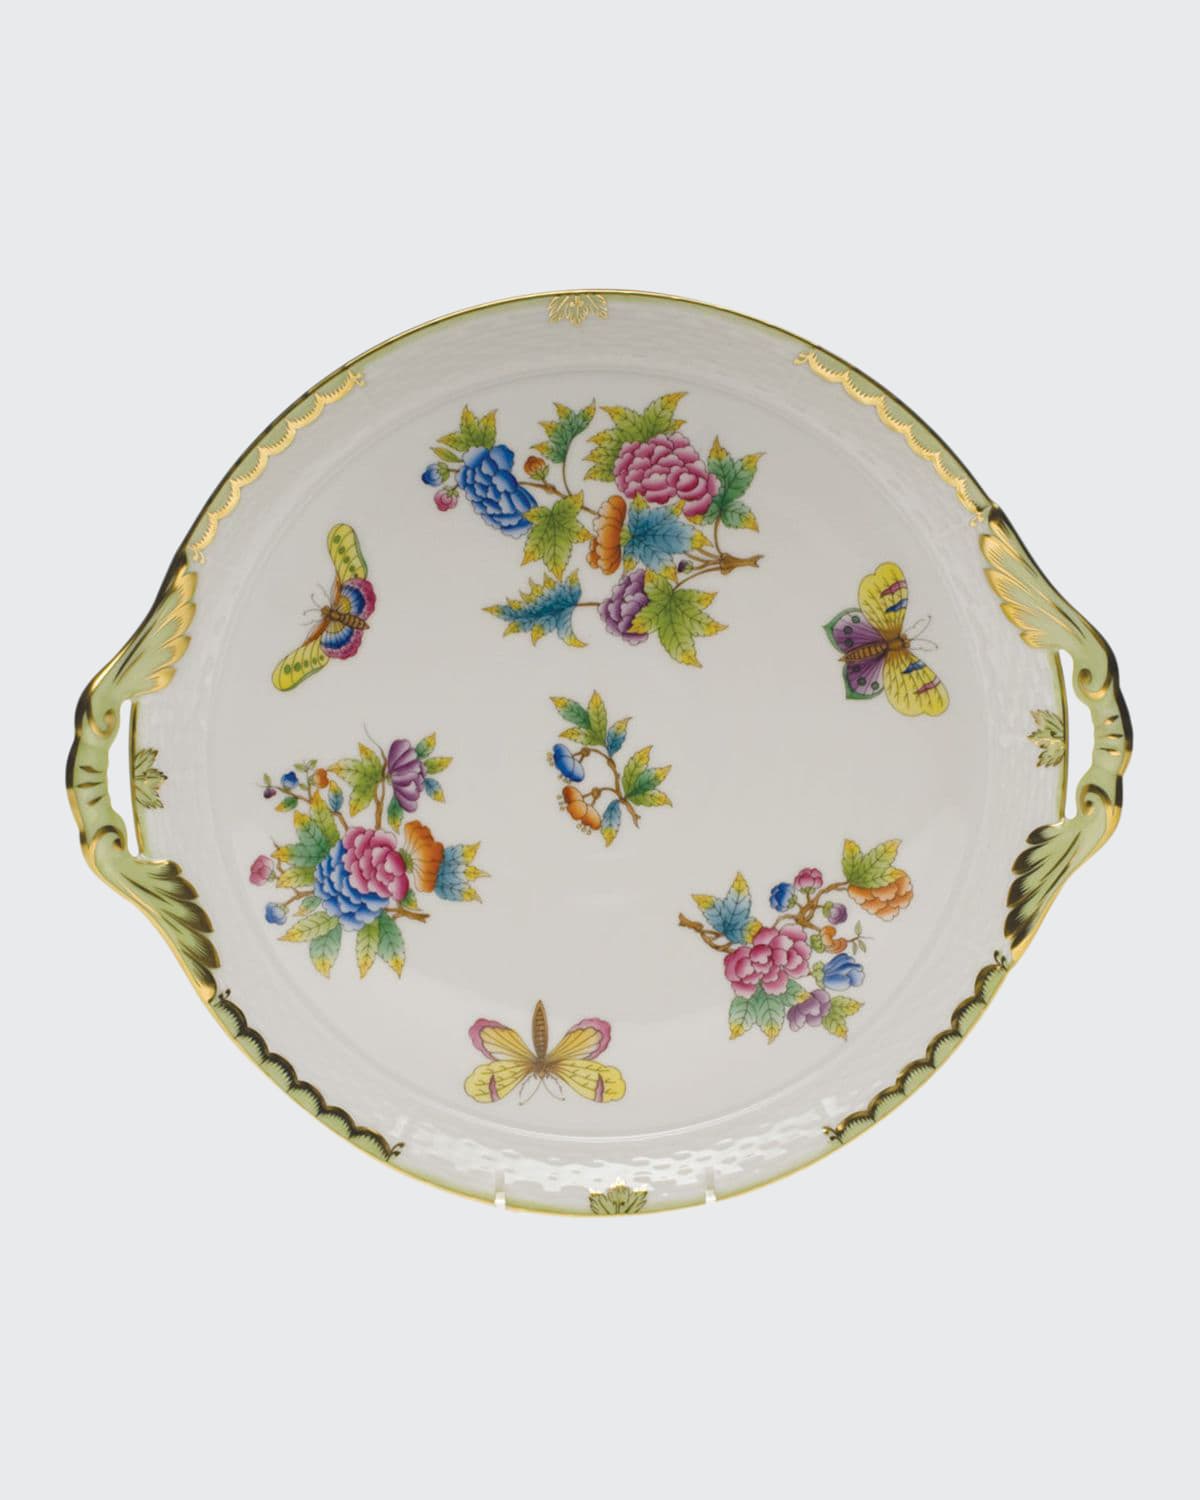 HEREND QUEEN VICTORIA ROUND TRAY WITH HANDLES